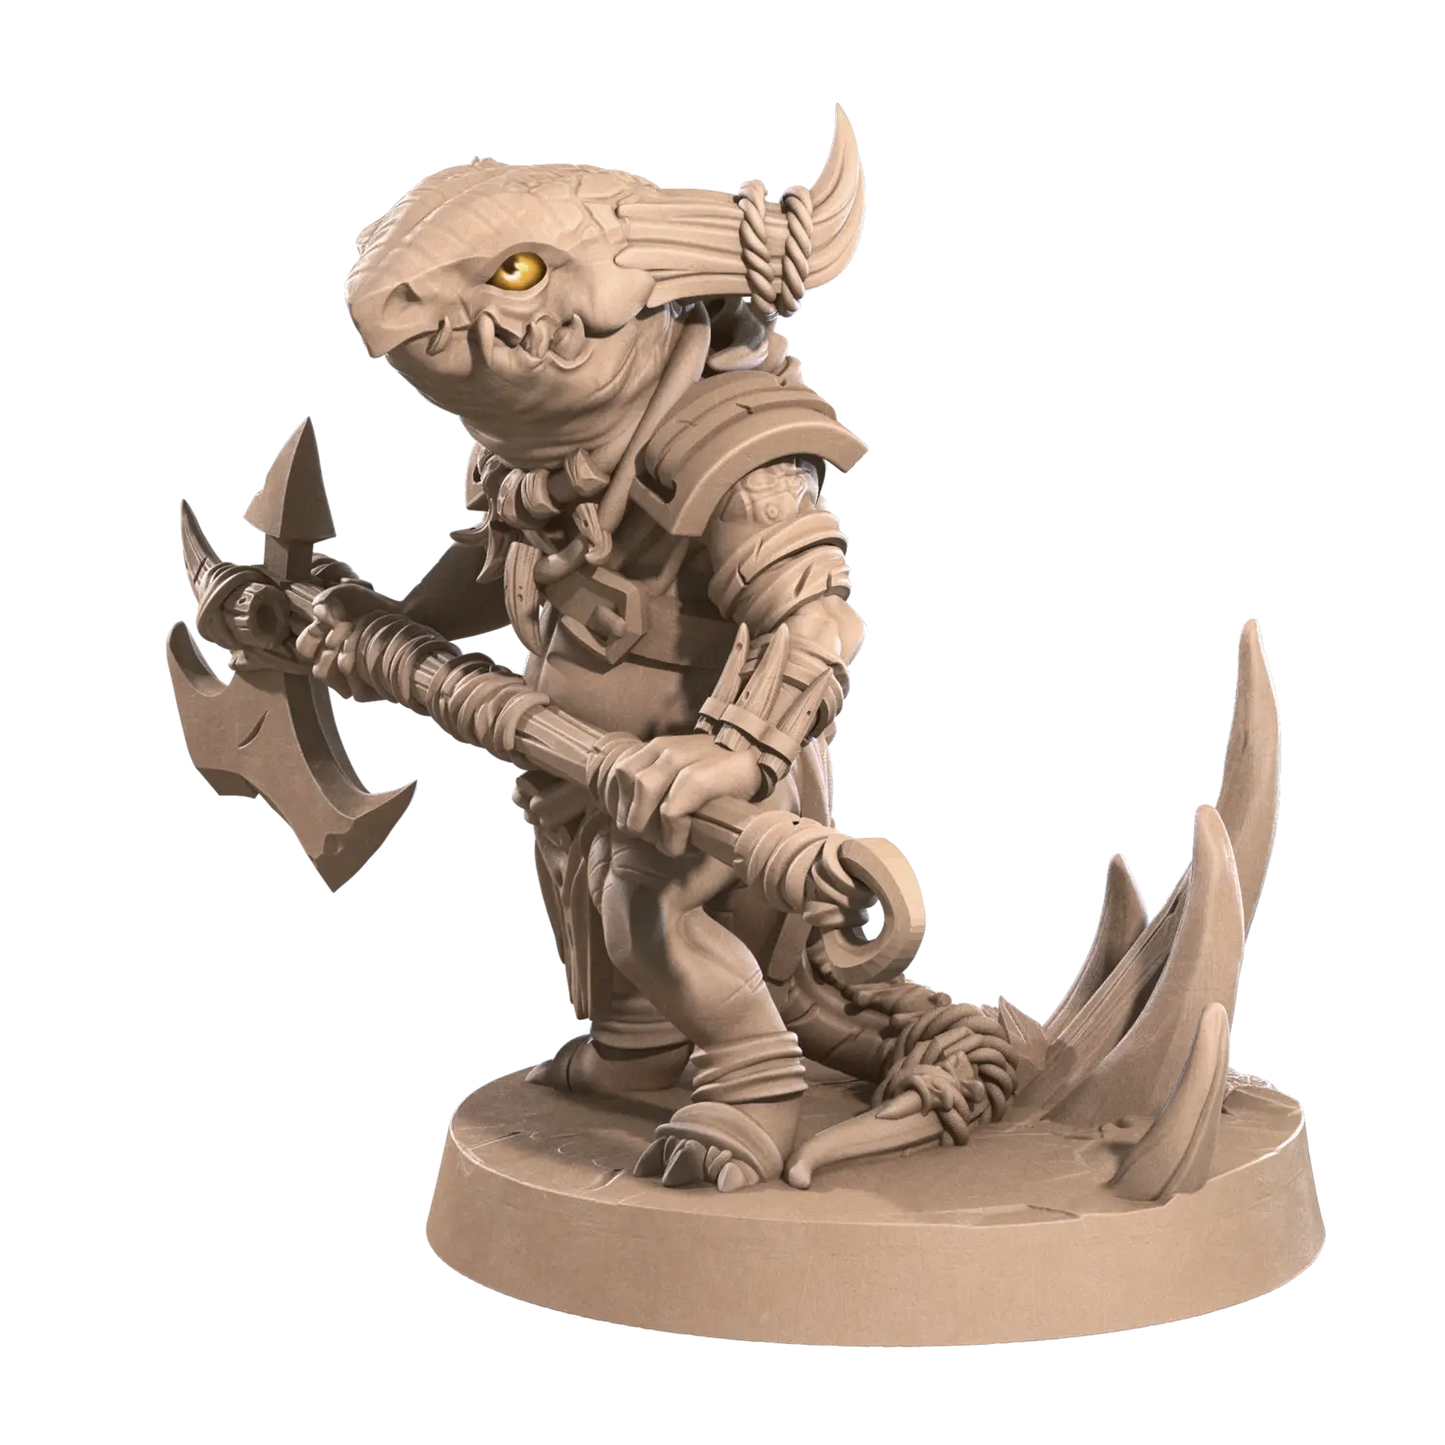 DnD Barbarian - Fighter - Kobold - Miniature - Monsters Vex  Barbarian - Fighter - Kobold - Miniature - Monsters sold by DoubleHitShop